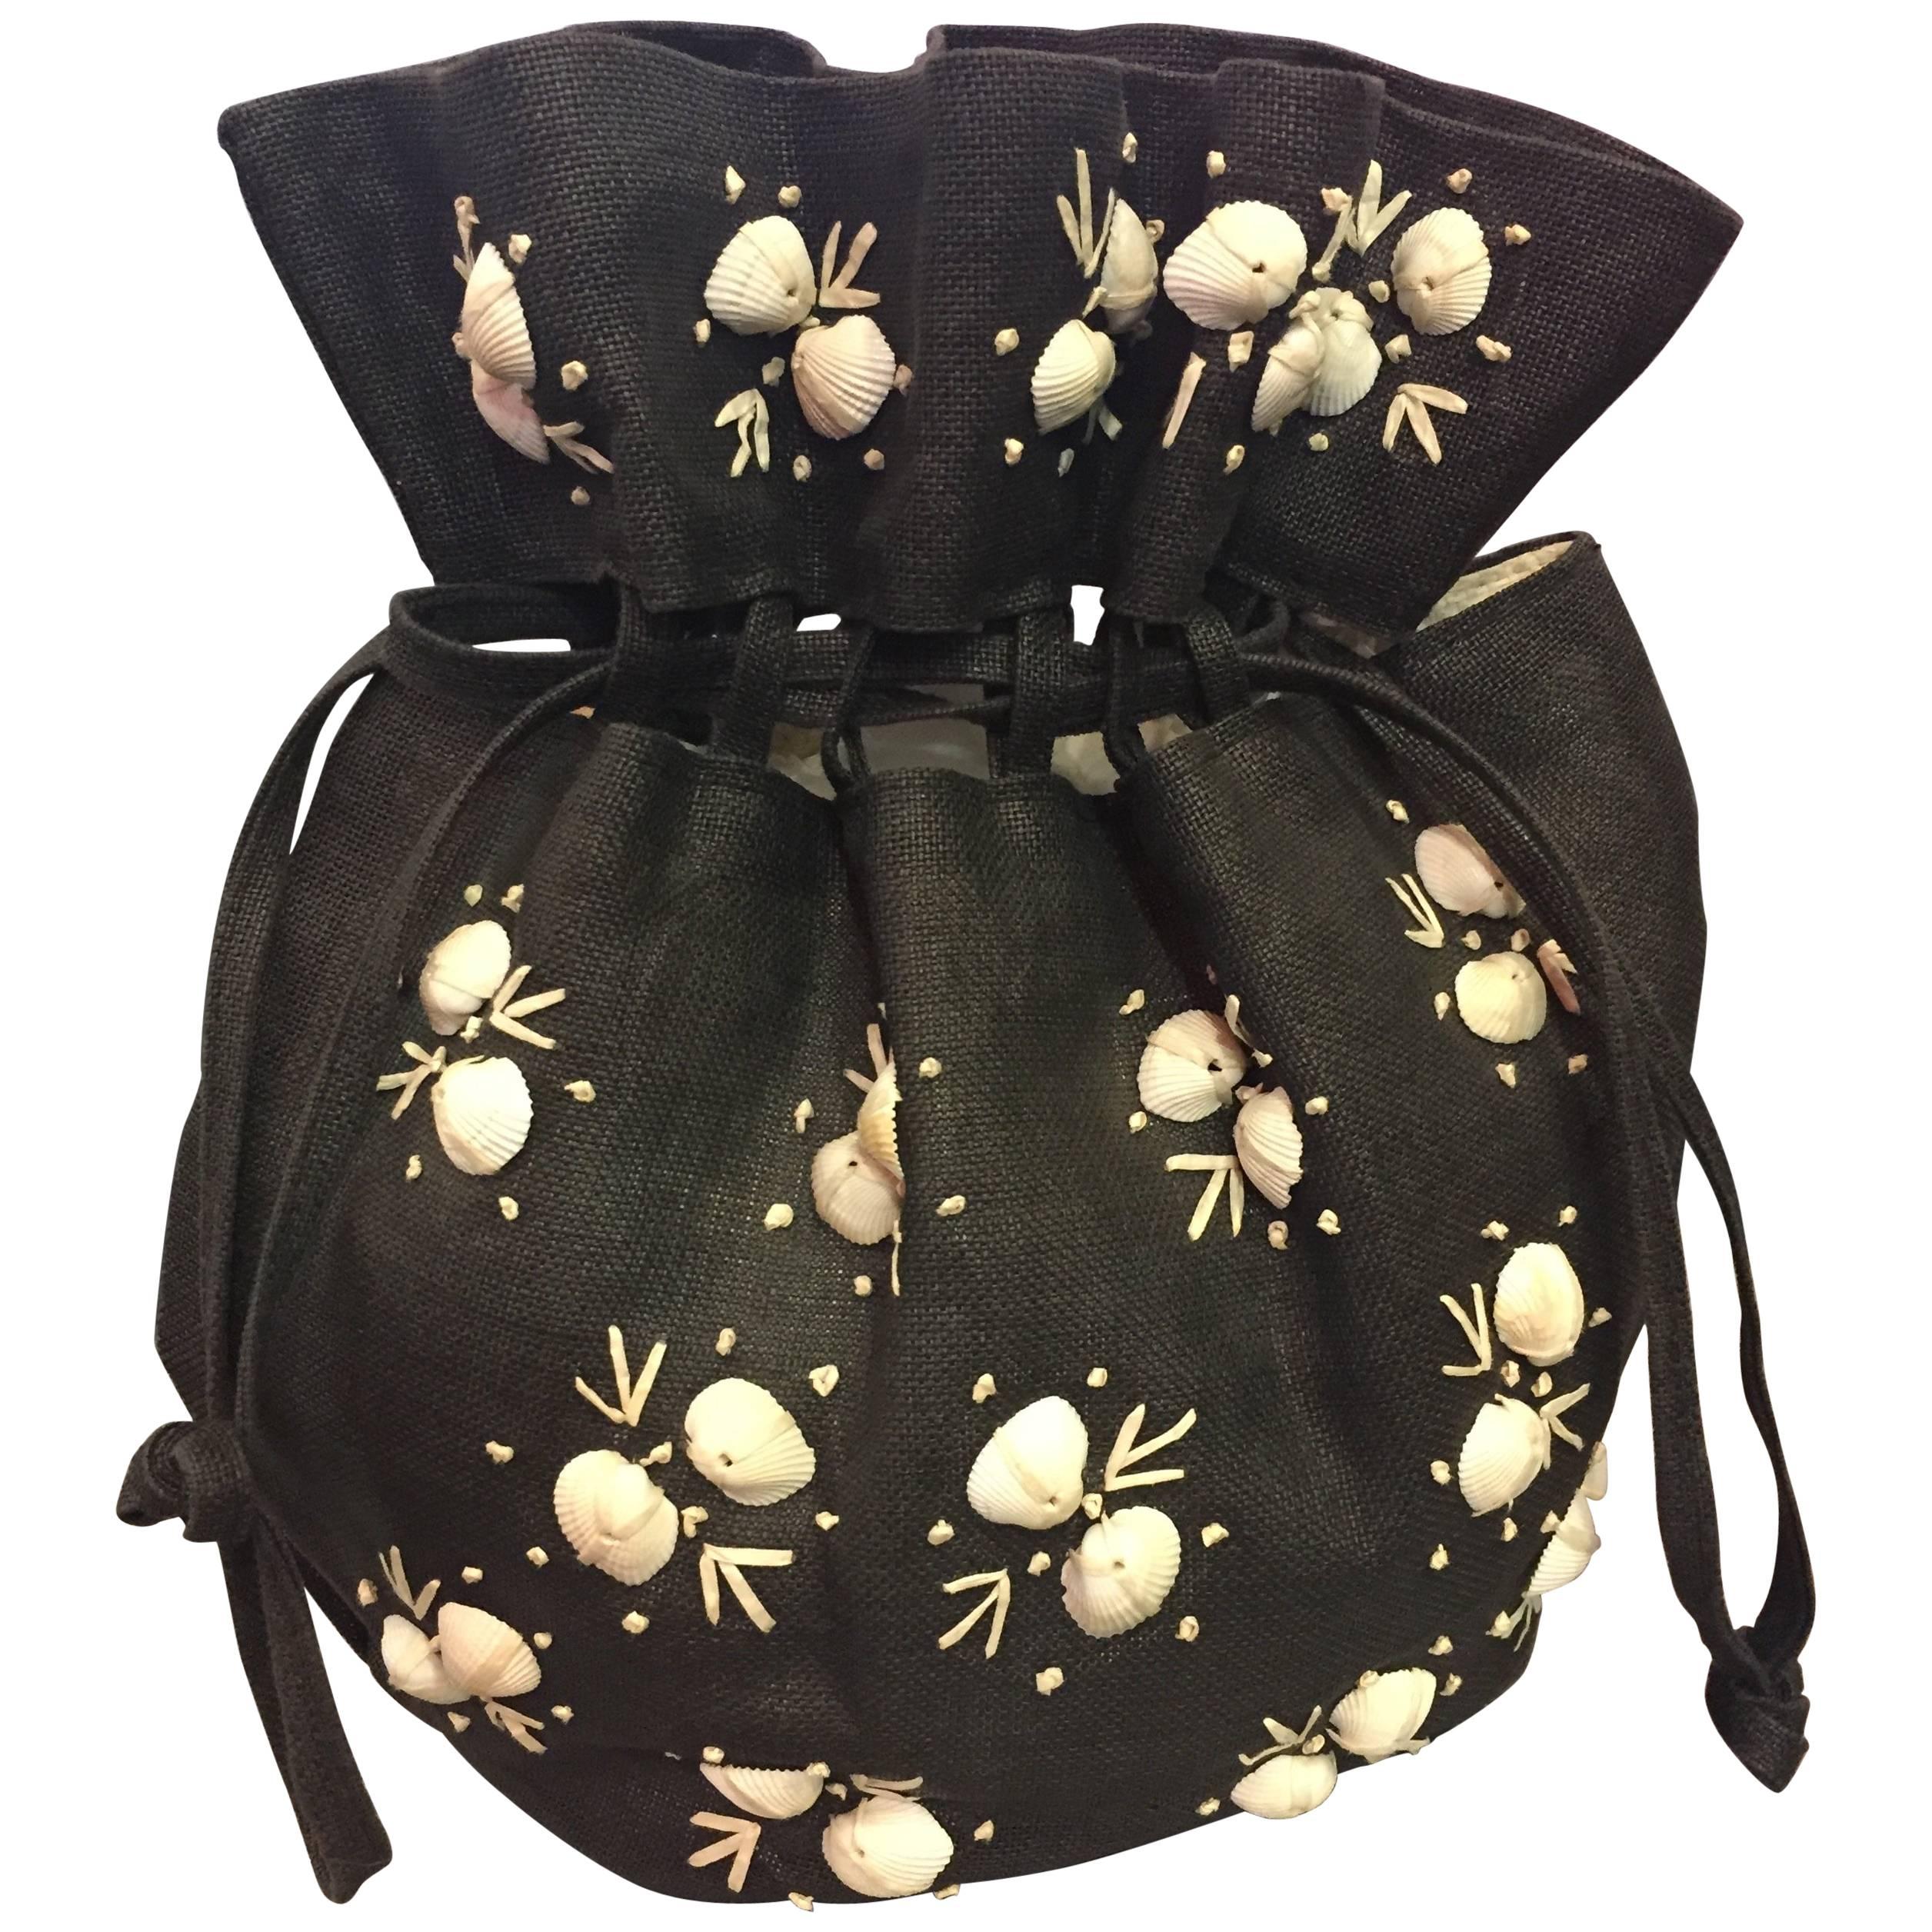 1950's Black Straw Pouch Bag with White Seashells 